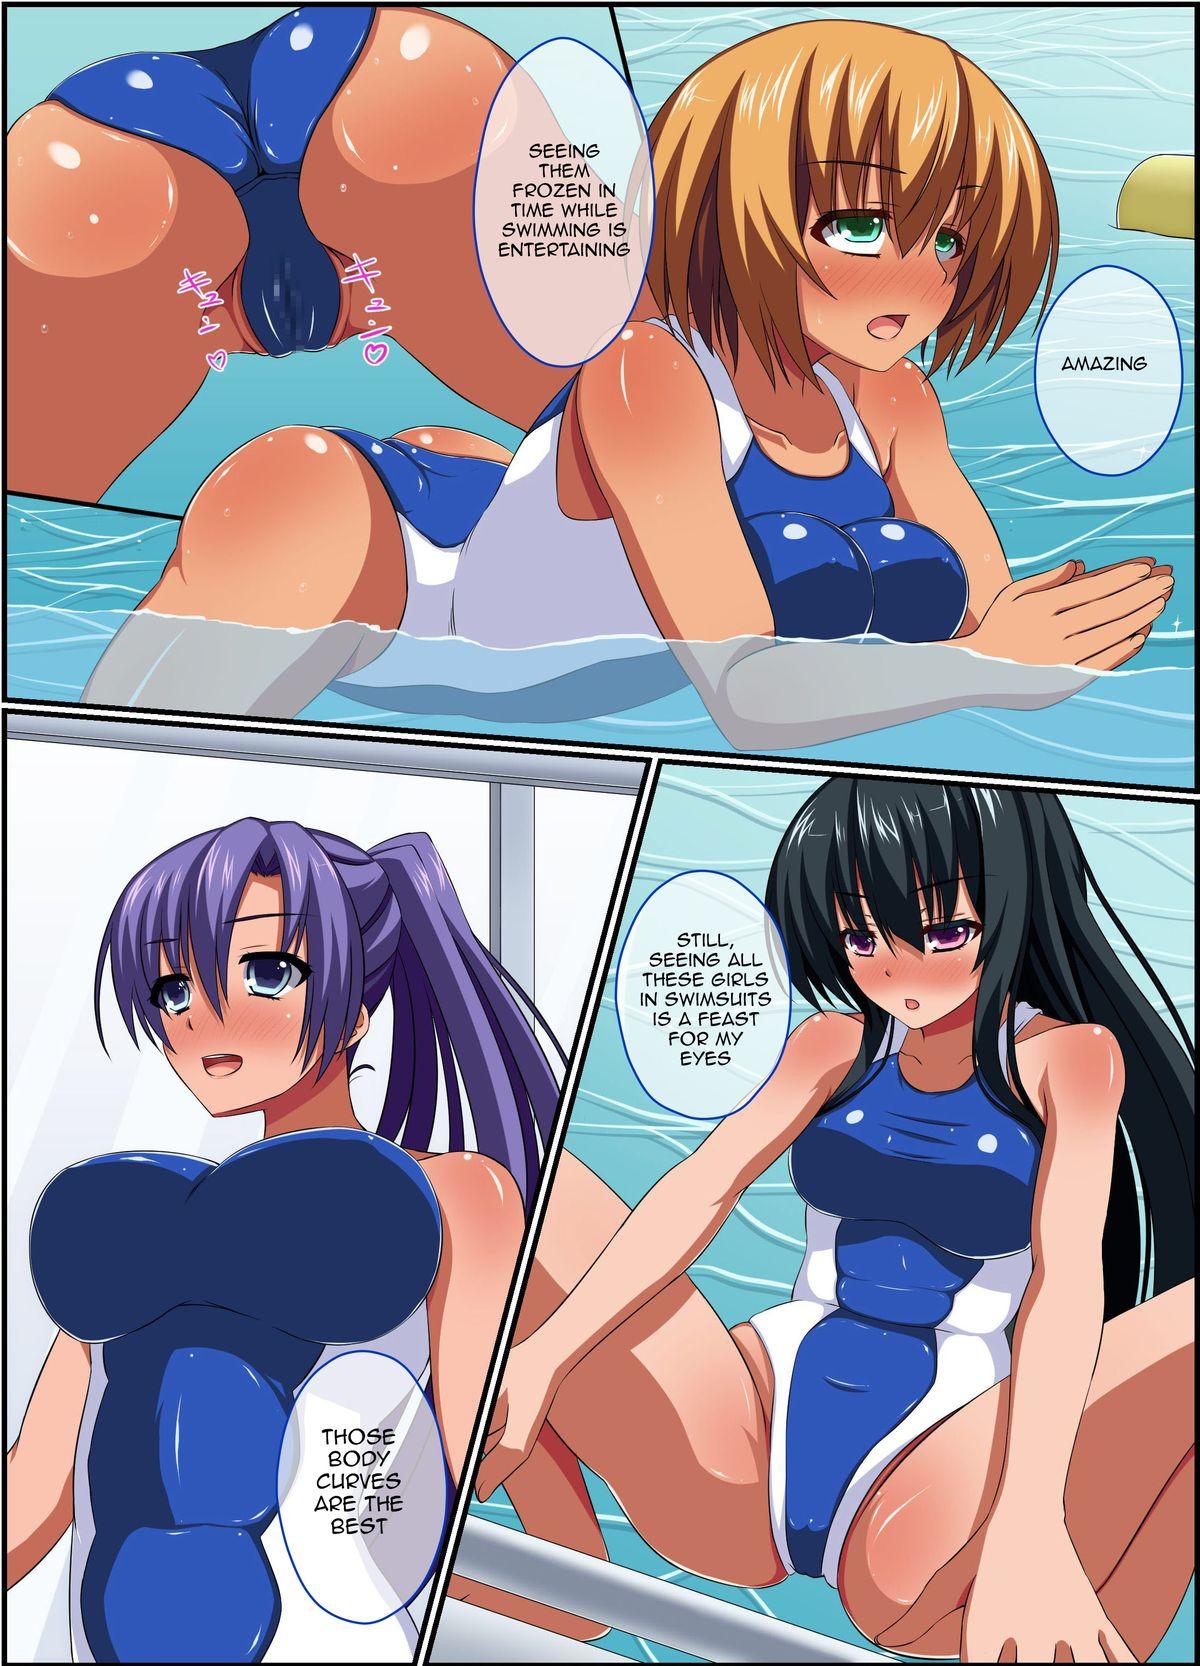 Spain Ase de Muremure no Joshi o Jikan o Tomete Okasu ~ Sports Gym Hen | Stopping Time to Violate Women While Horny With Sweat - Sports Gym Edition Reversecowgirl - Page 8